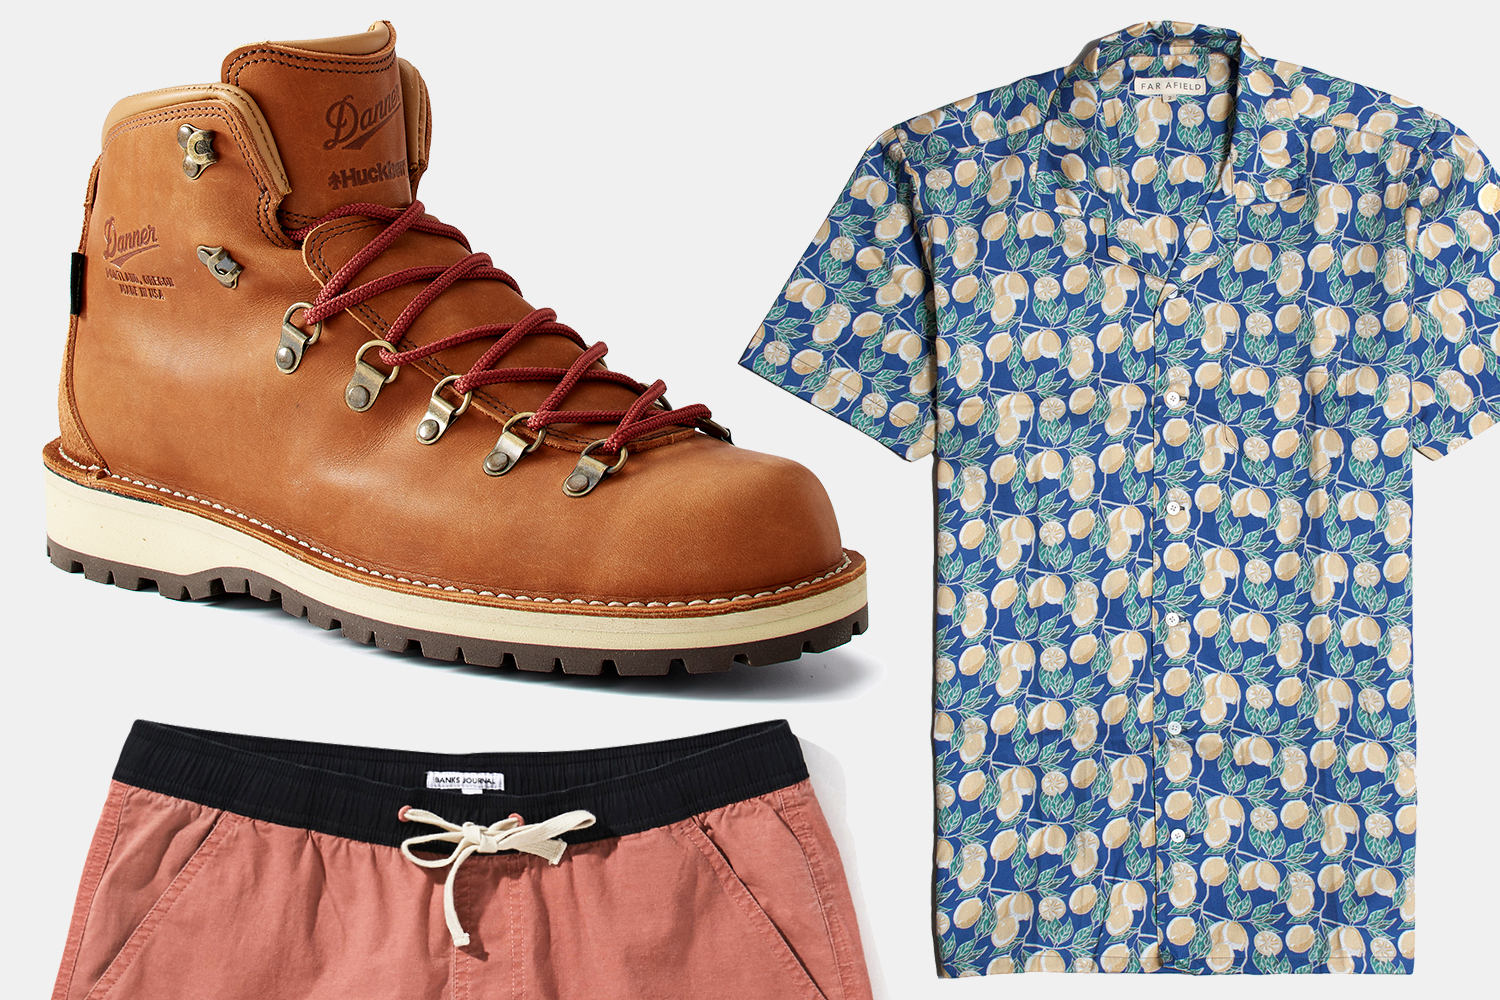 A Danner x Huckberry boot, Far Afield button-up and Banks Journal boardshorts